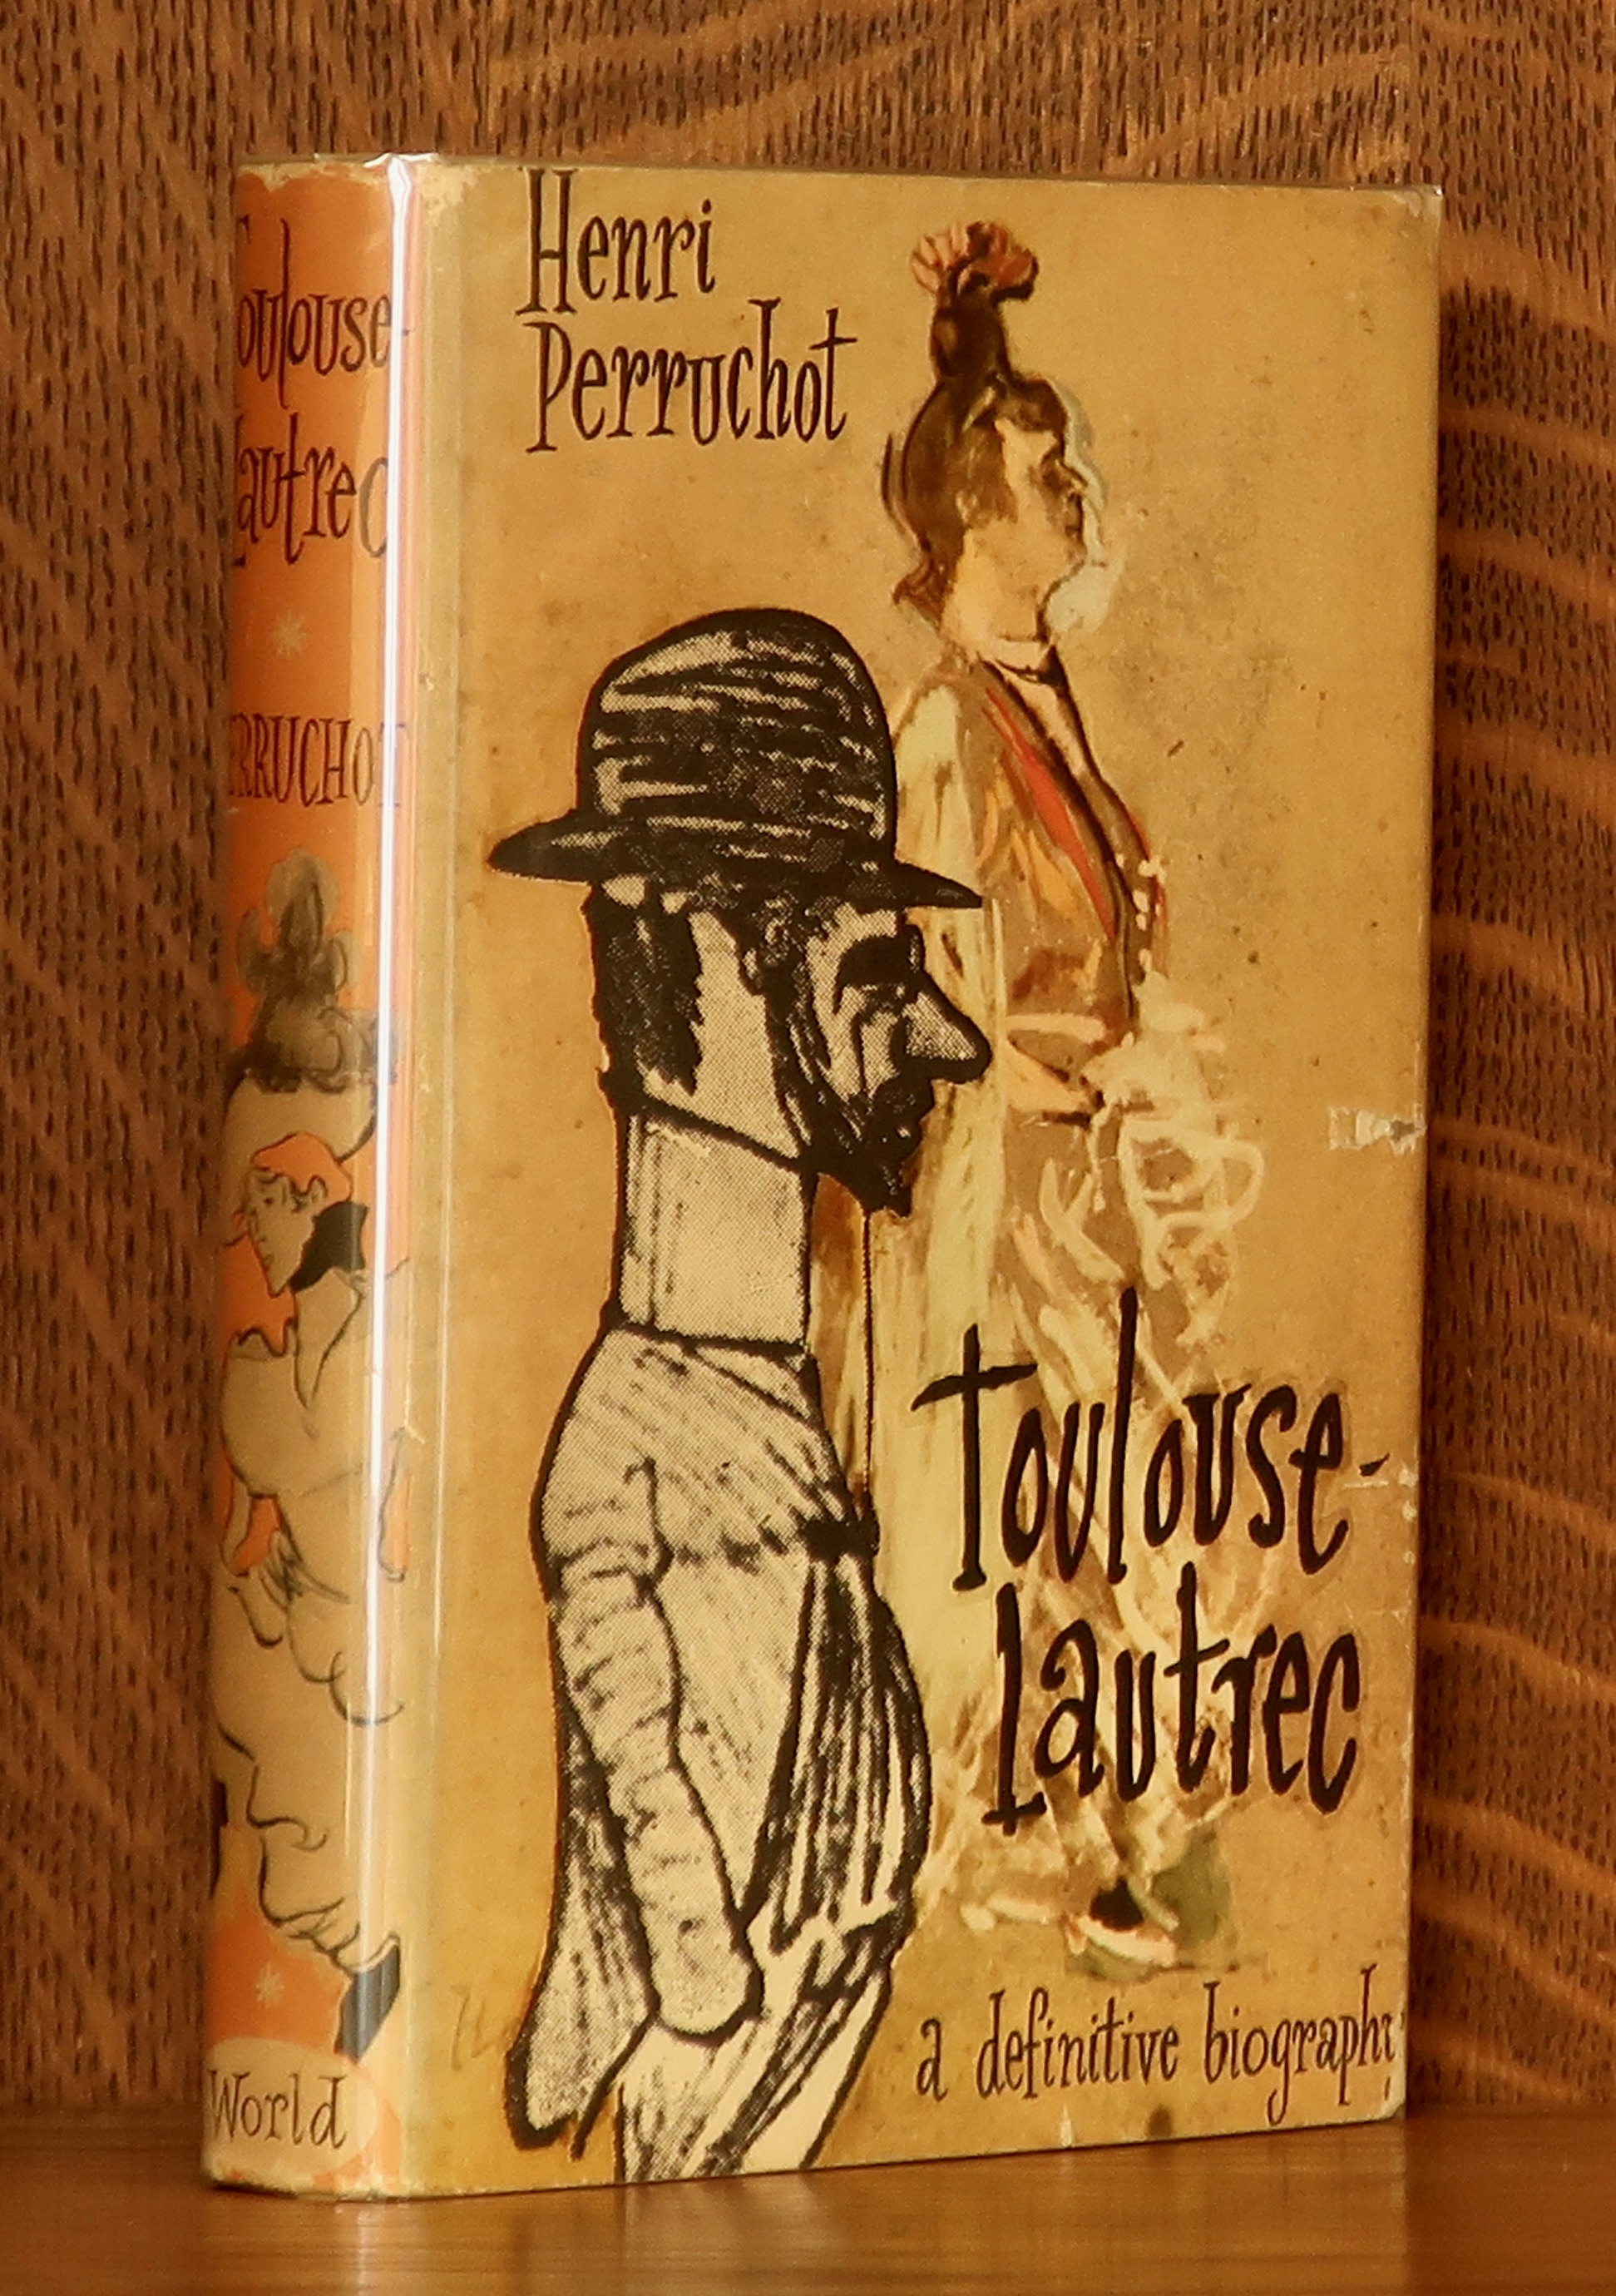 TOULOUSE-LAUTREC by Henri Perruchot: Very good + Hardcover (1960 ...